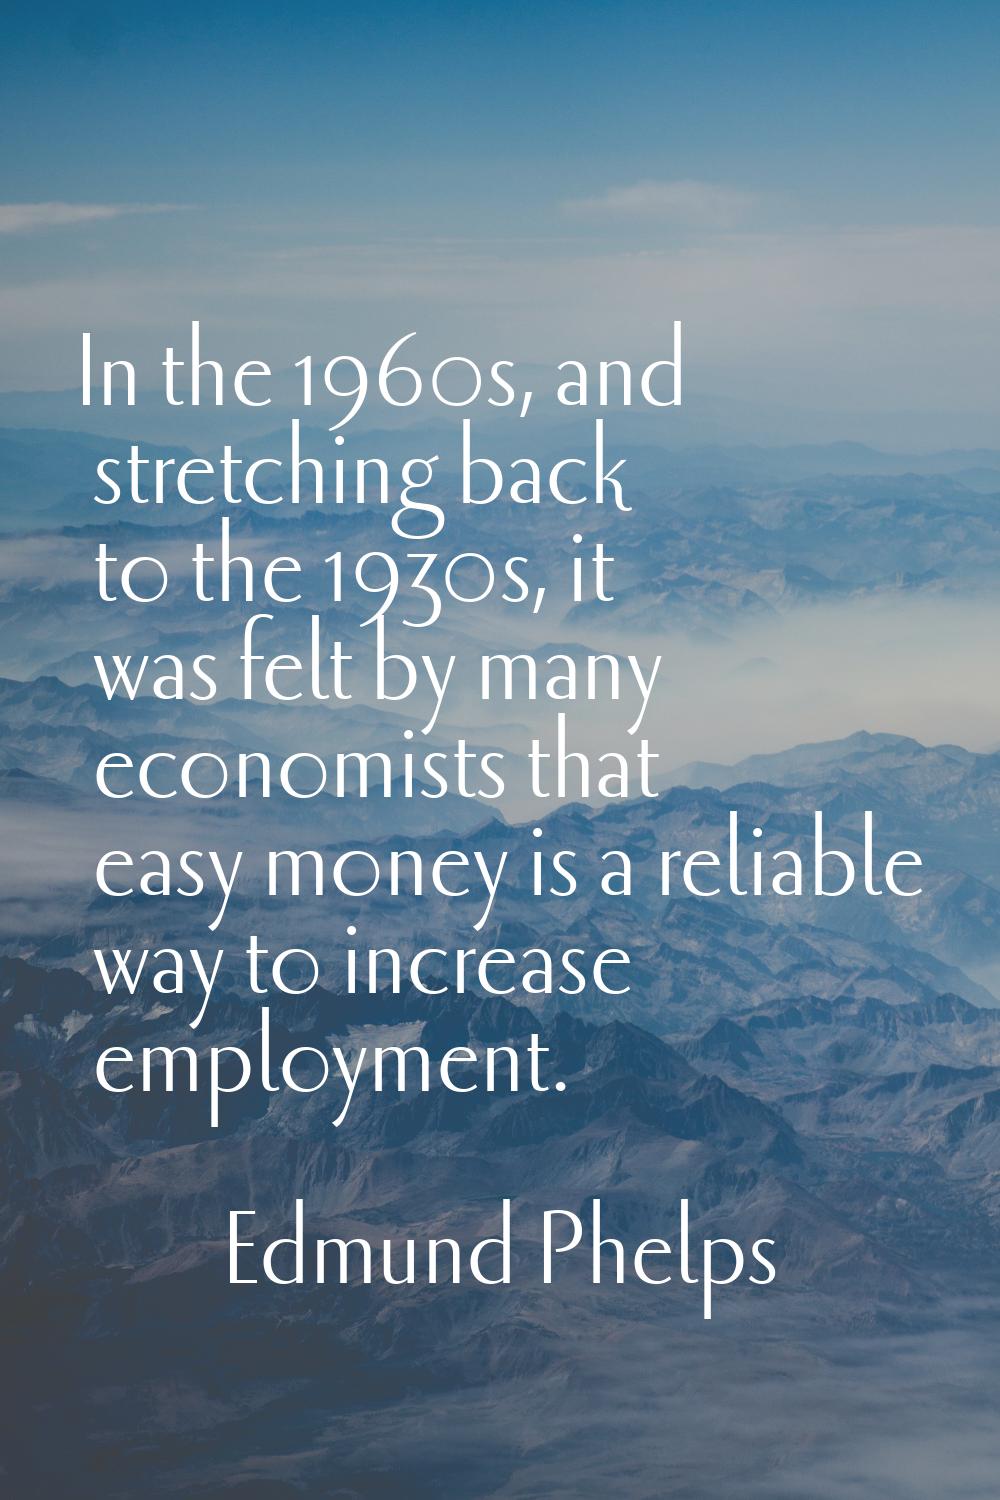 In the 1960s, and stretching back to the 1930s, it was felt by many economists that easy money is a